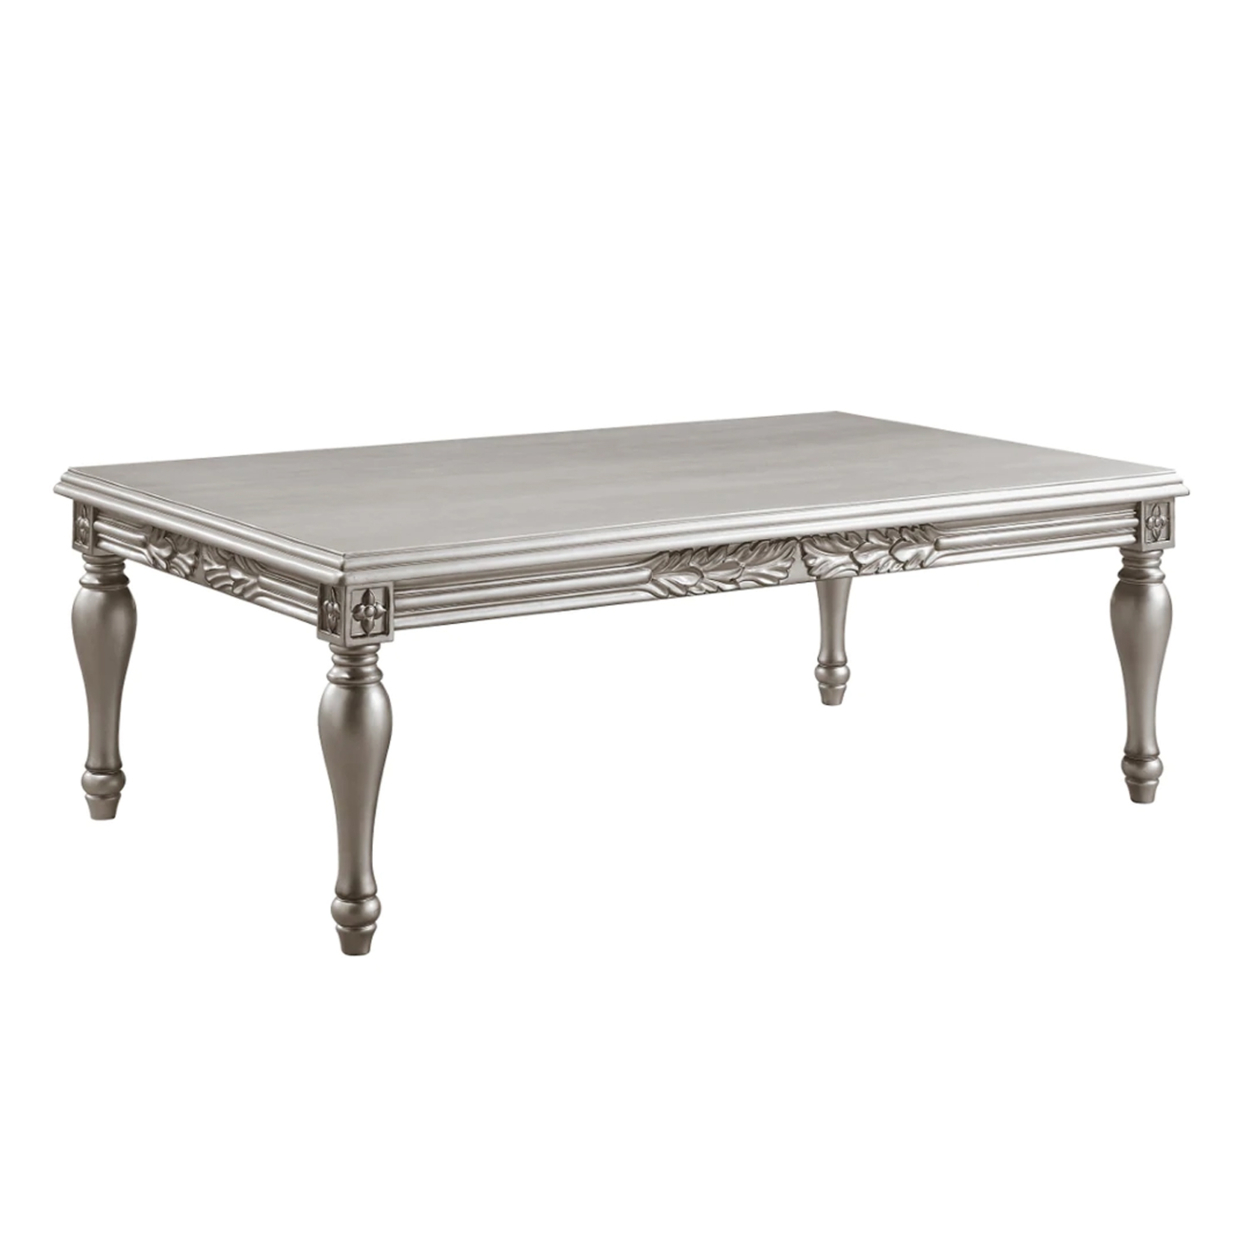 Sto 59 Inch Classic Coffee Table, Floral Trim, Turned Legs, Wood, Silver- Saltoro Sherpi